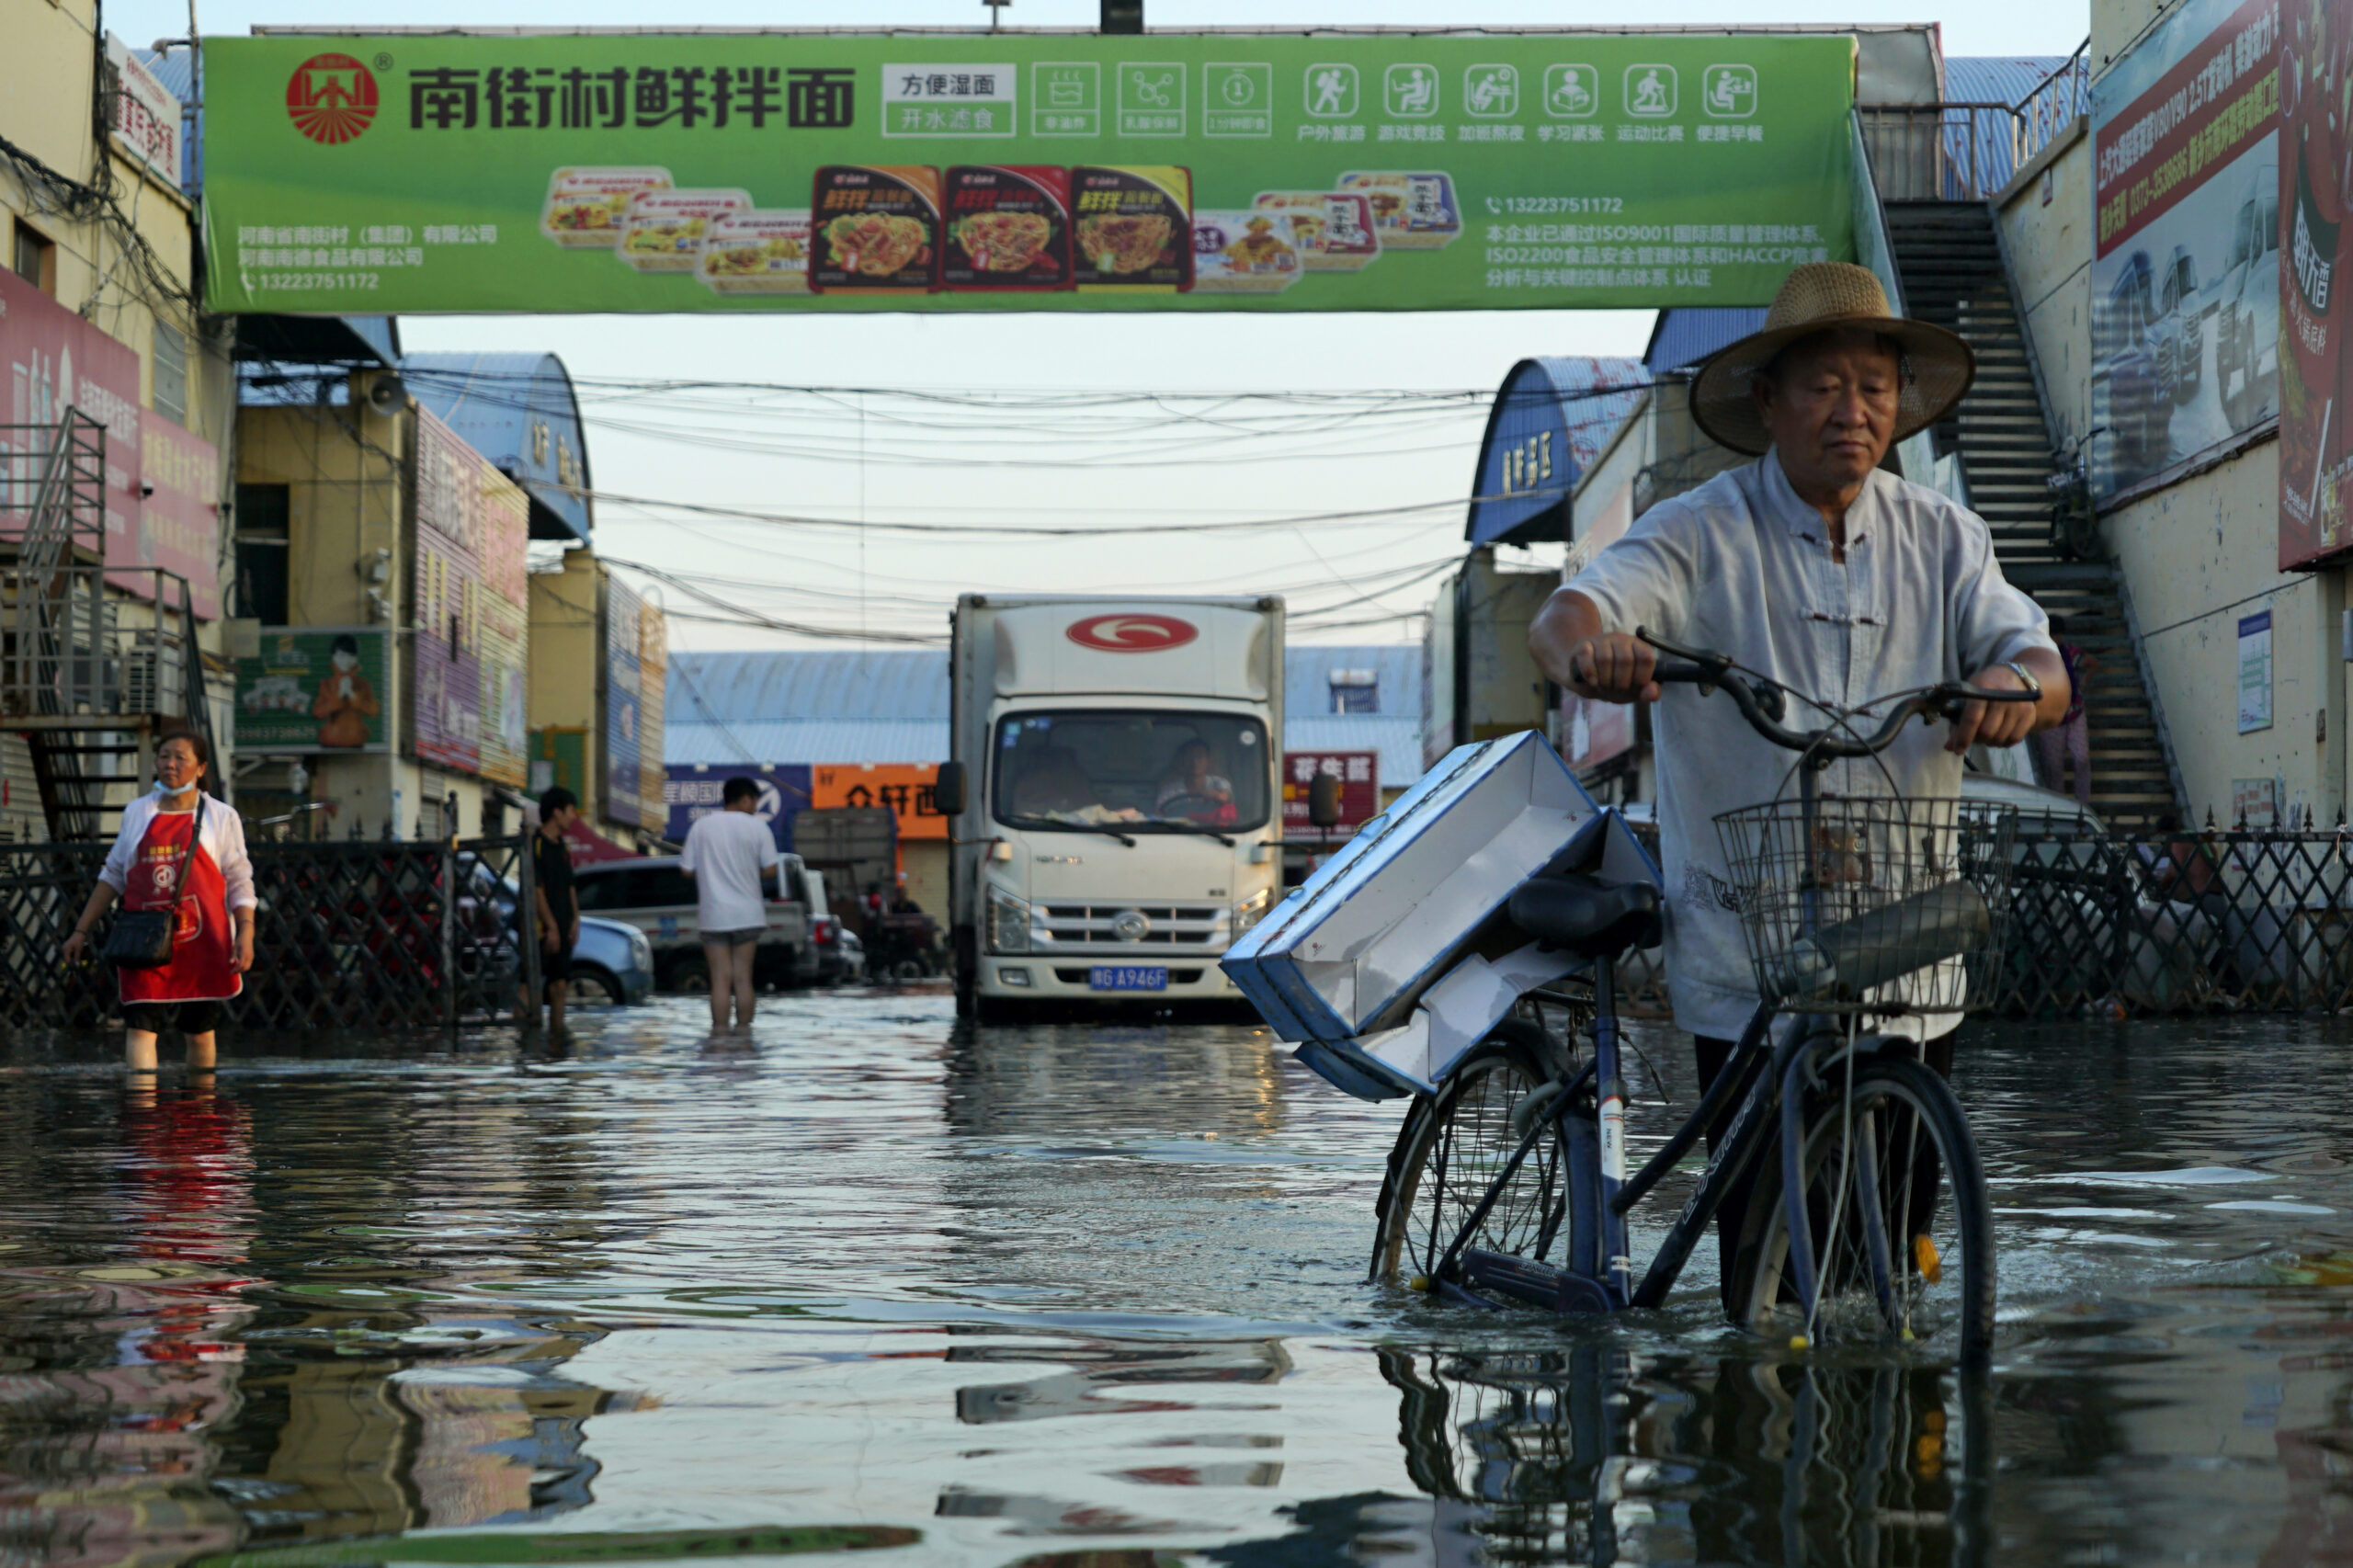 FILE - In this Monday, July 26, 2021 file photo, a man carries goods on his bicycle as he walks out of the the Yubei Agricultural and Aquatic Products World in Xinxiang in central China's Henan Province. The Intergovernmental Panel on Climate Change report released on Monday, Aug. 9, 2021, says warming already is smacking Earth hard and quickly with accelerating sea level rise, shrinking ice and worsening extremes such as heat waves, droughts, floods and storms. (AP Photo/Dake Kang, File)